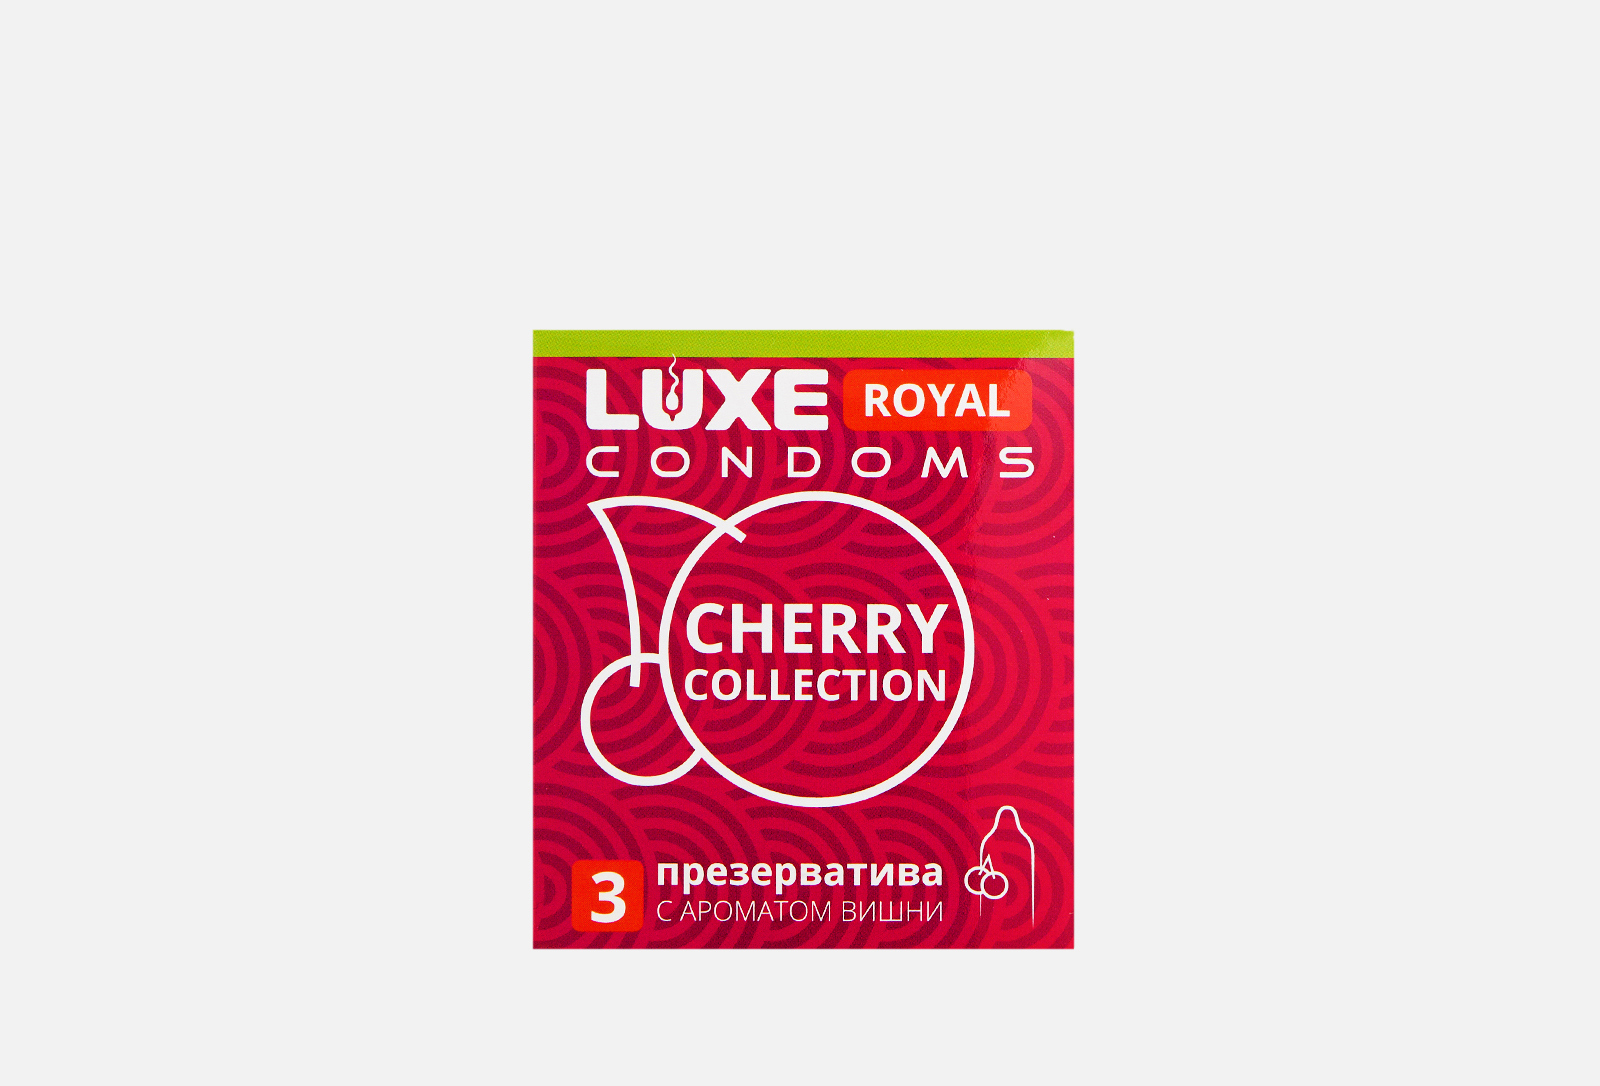 Cherry collection. Maxima Luxe Royal. Luxe Royal презервативы вишня. Презервативы Luxe Royal Cherry collection 1х24. Вишня Роял Тияго.